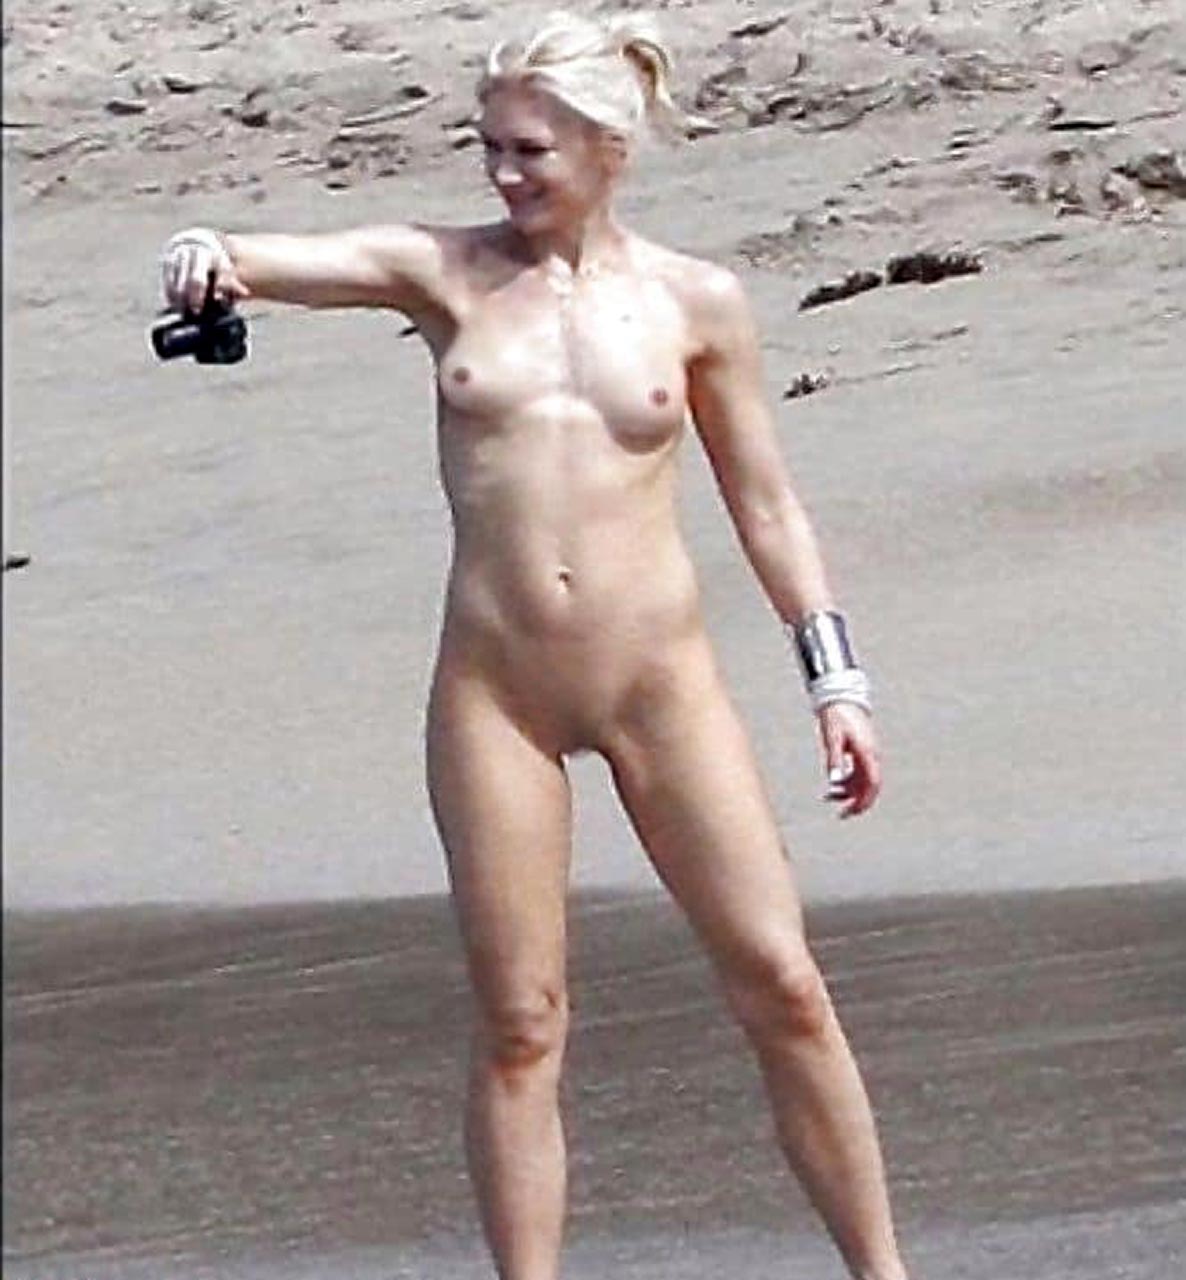 76 naked picture Singer Gwen Stefani Nude Tits Paparazzi Beach Photos, an.....